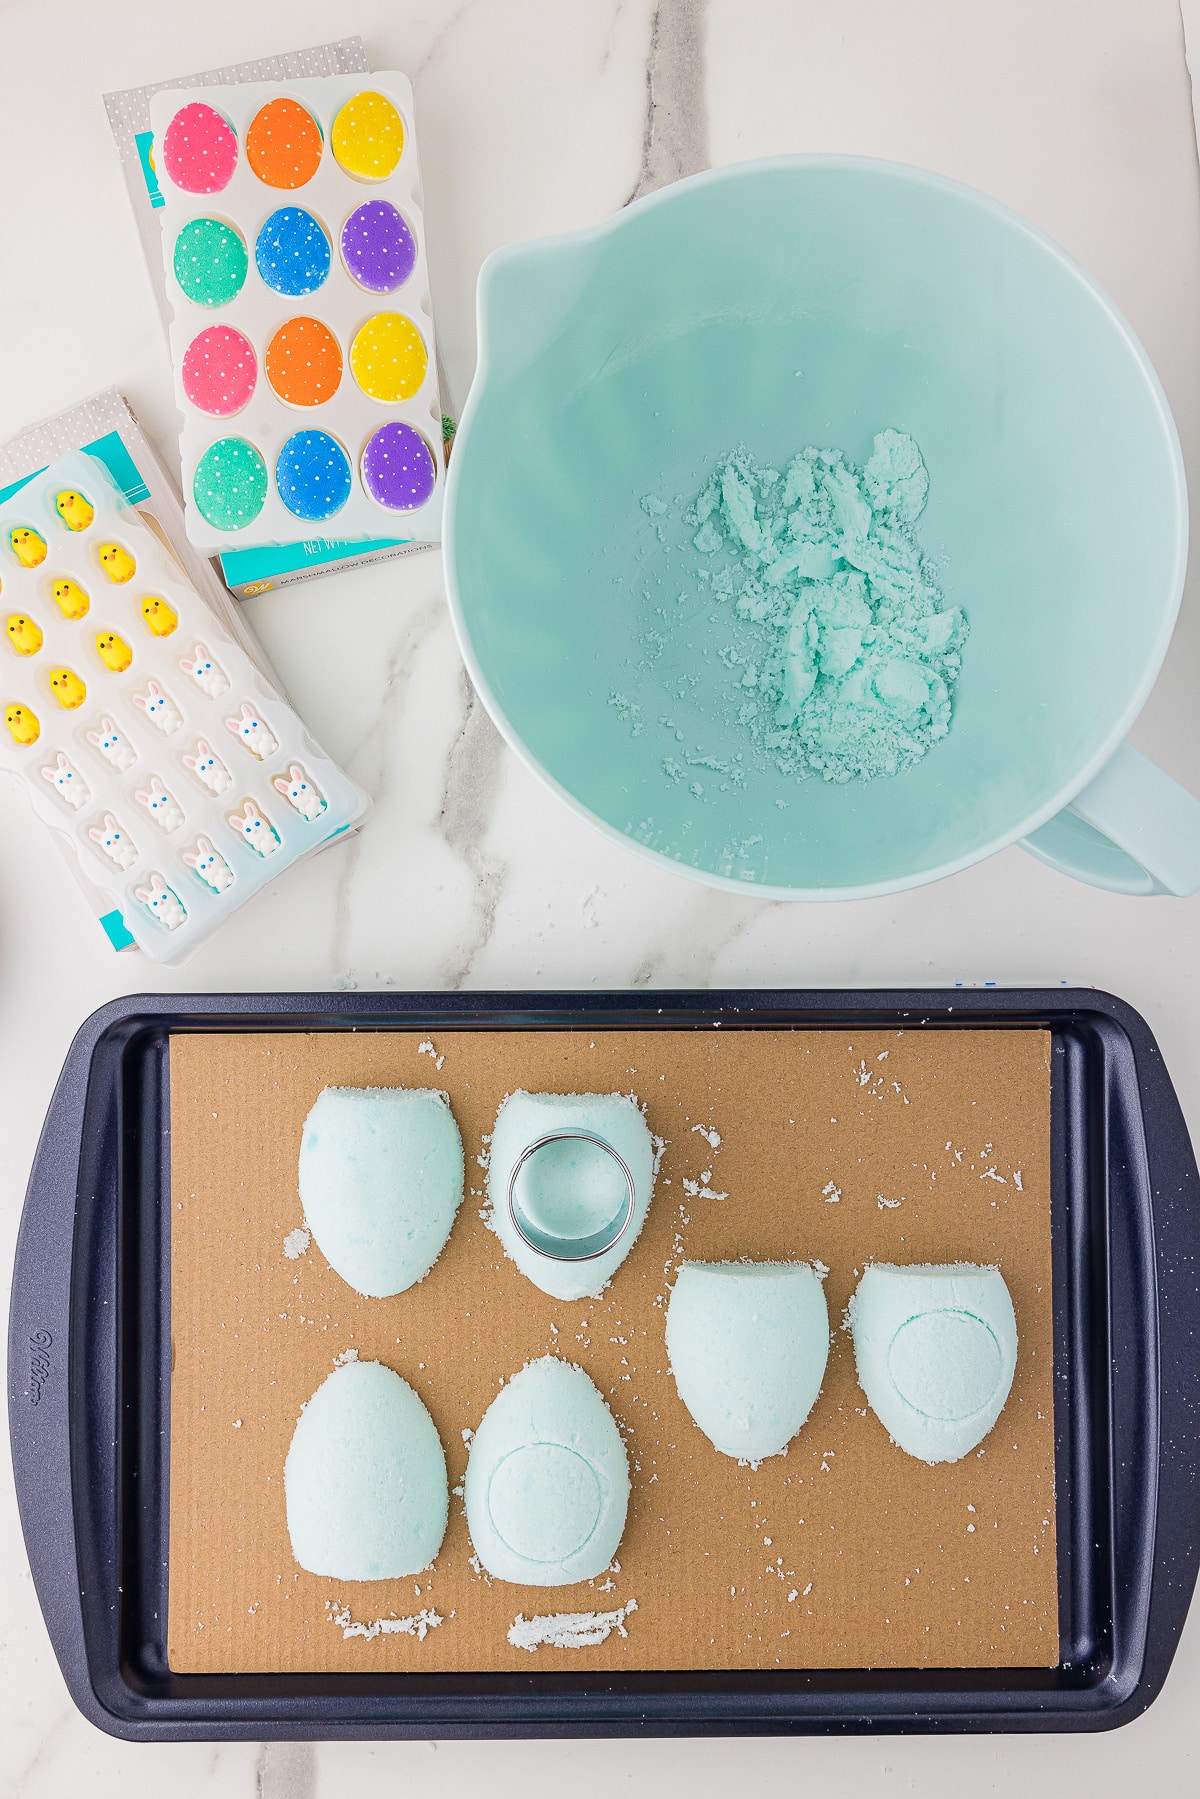 Homemade light blue sugar eggs on a baking sheet with Easter candy and decor